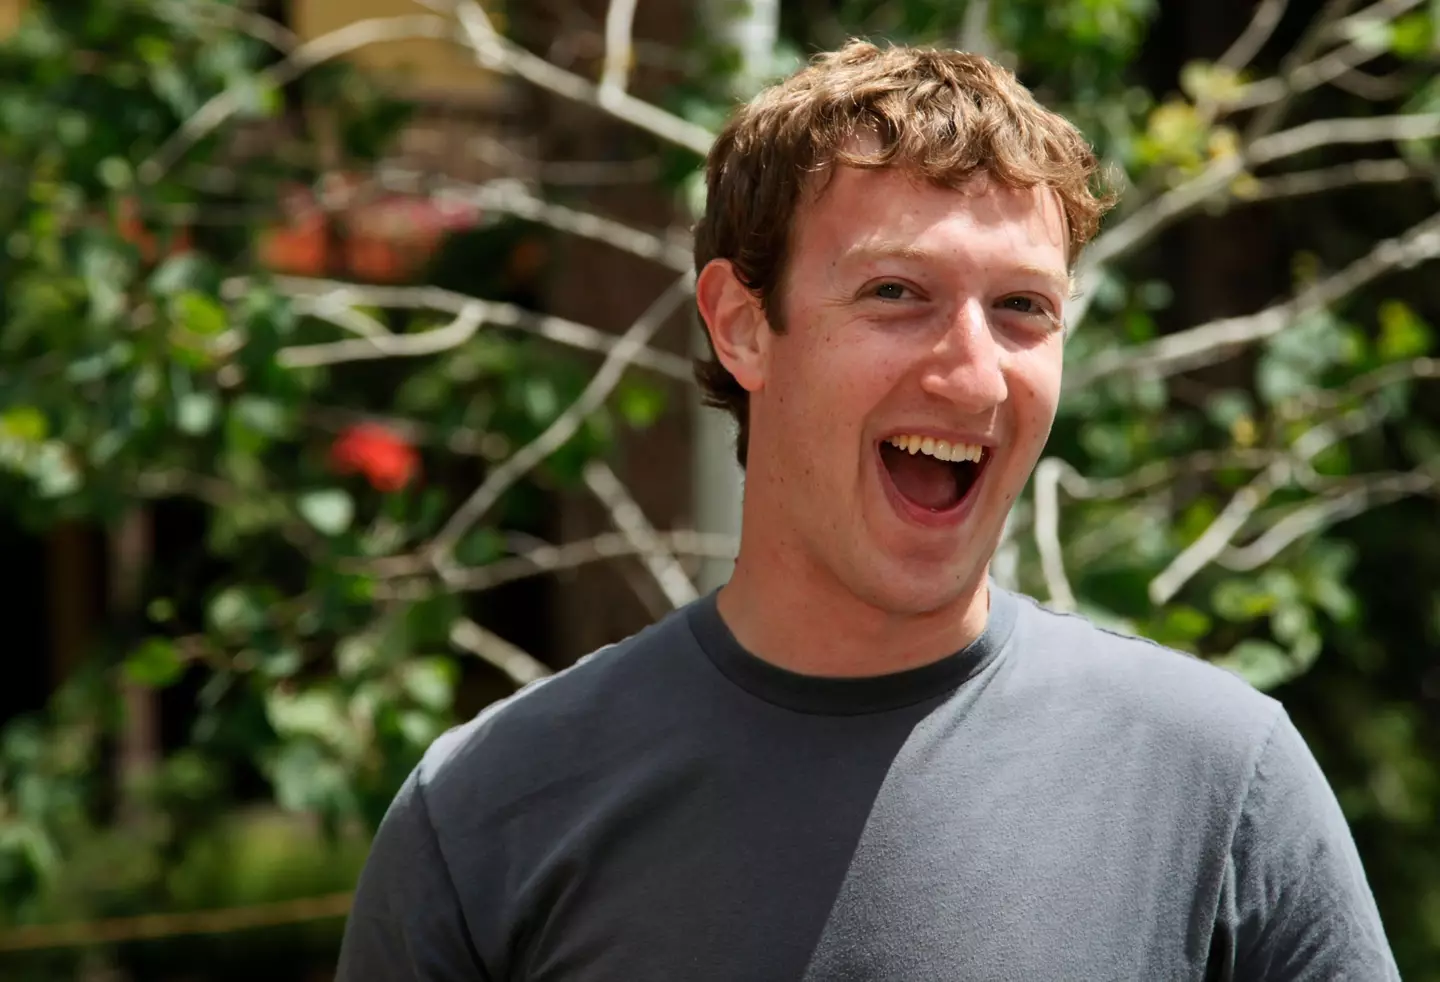 Billionaire Mark Zuckerberg has managed to lose half his fortune and still remain a billionaire, isn’t that lovely for him?